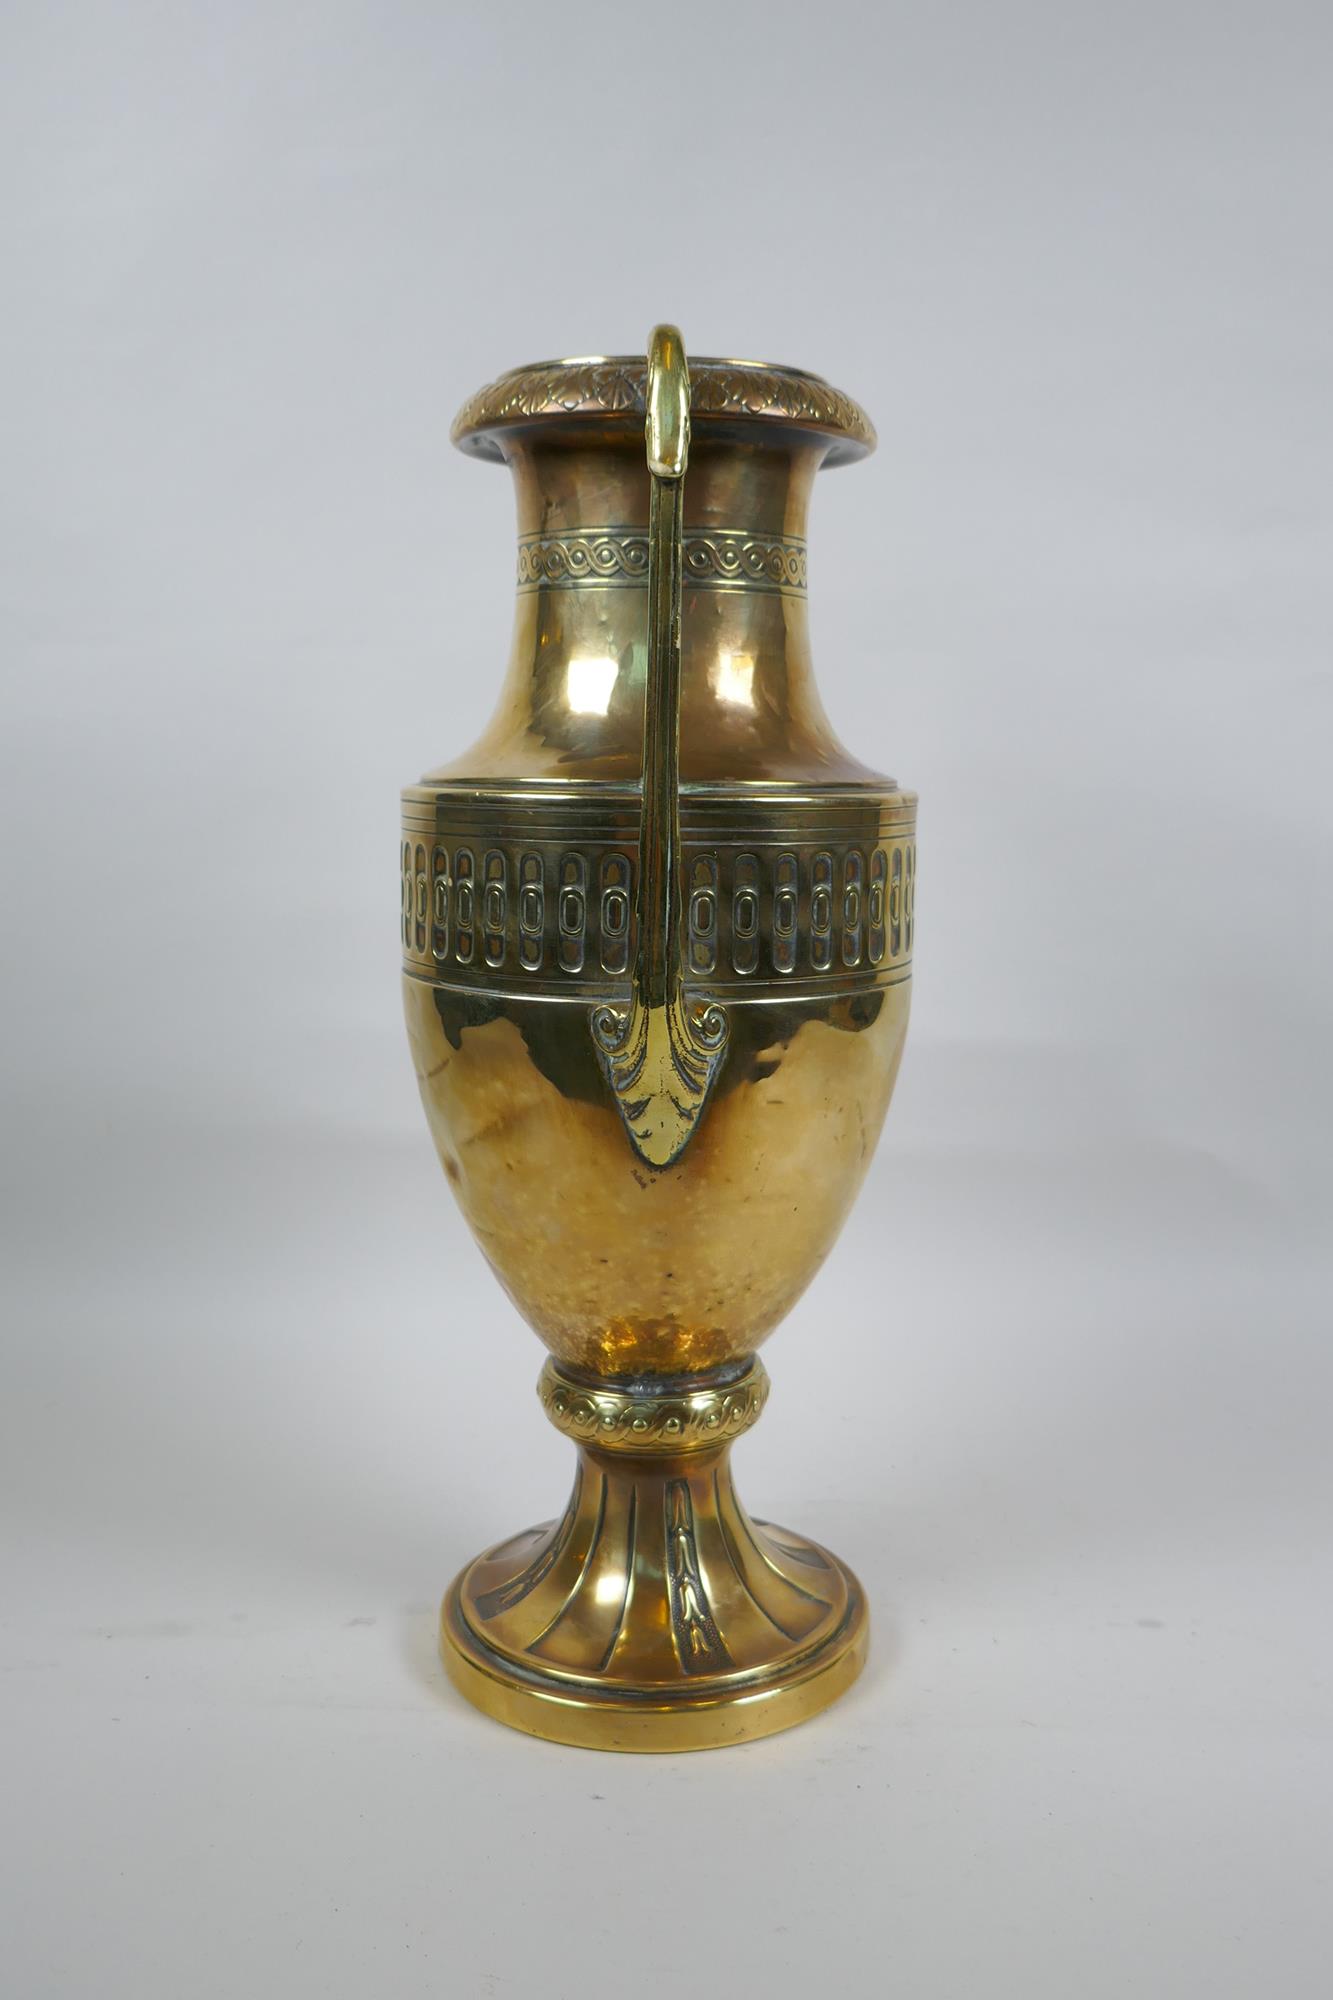 A late C19th/early C20th German brass two handled Grecian style urn by Carl Deffner of Esslingen, - Image 2 of 6